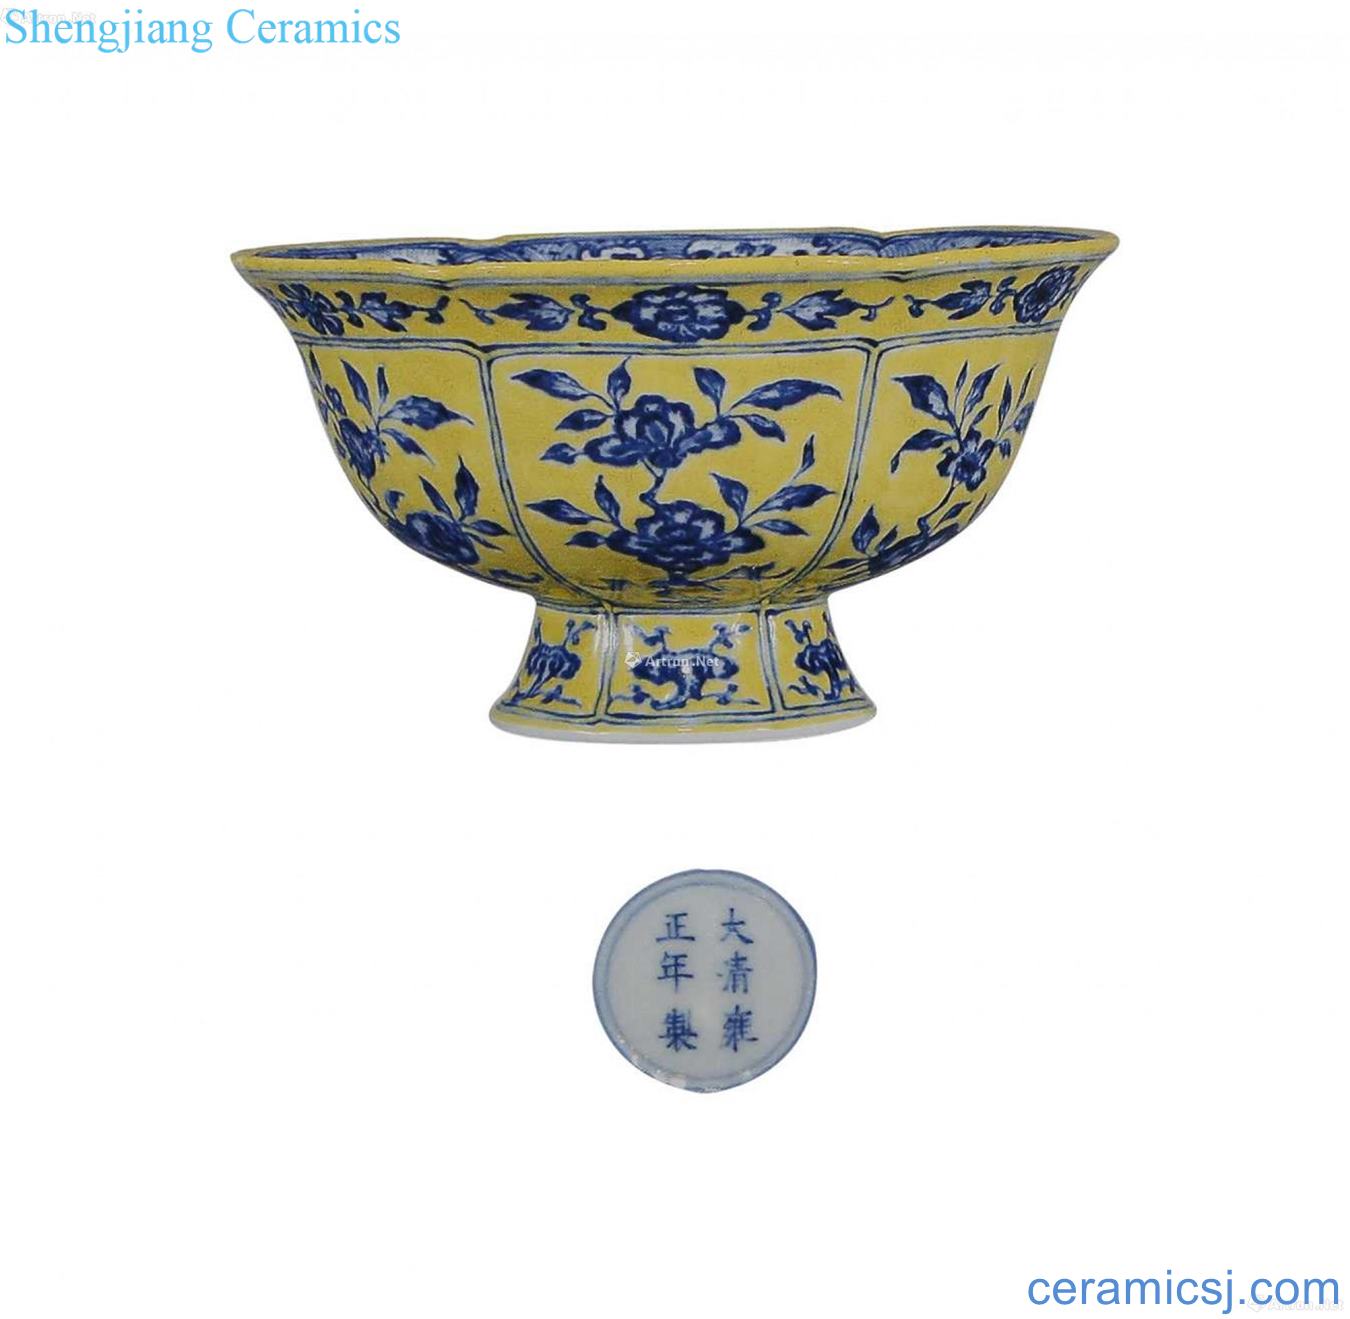 About yellow to blue and white flower mouth footed bowl